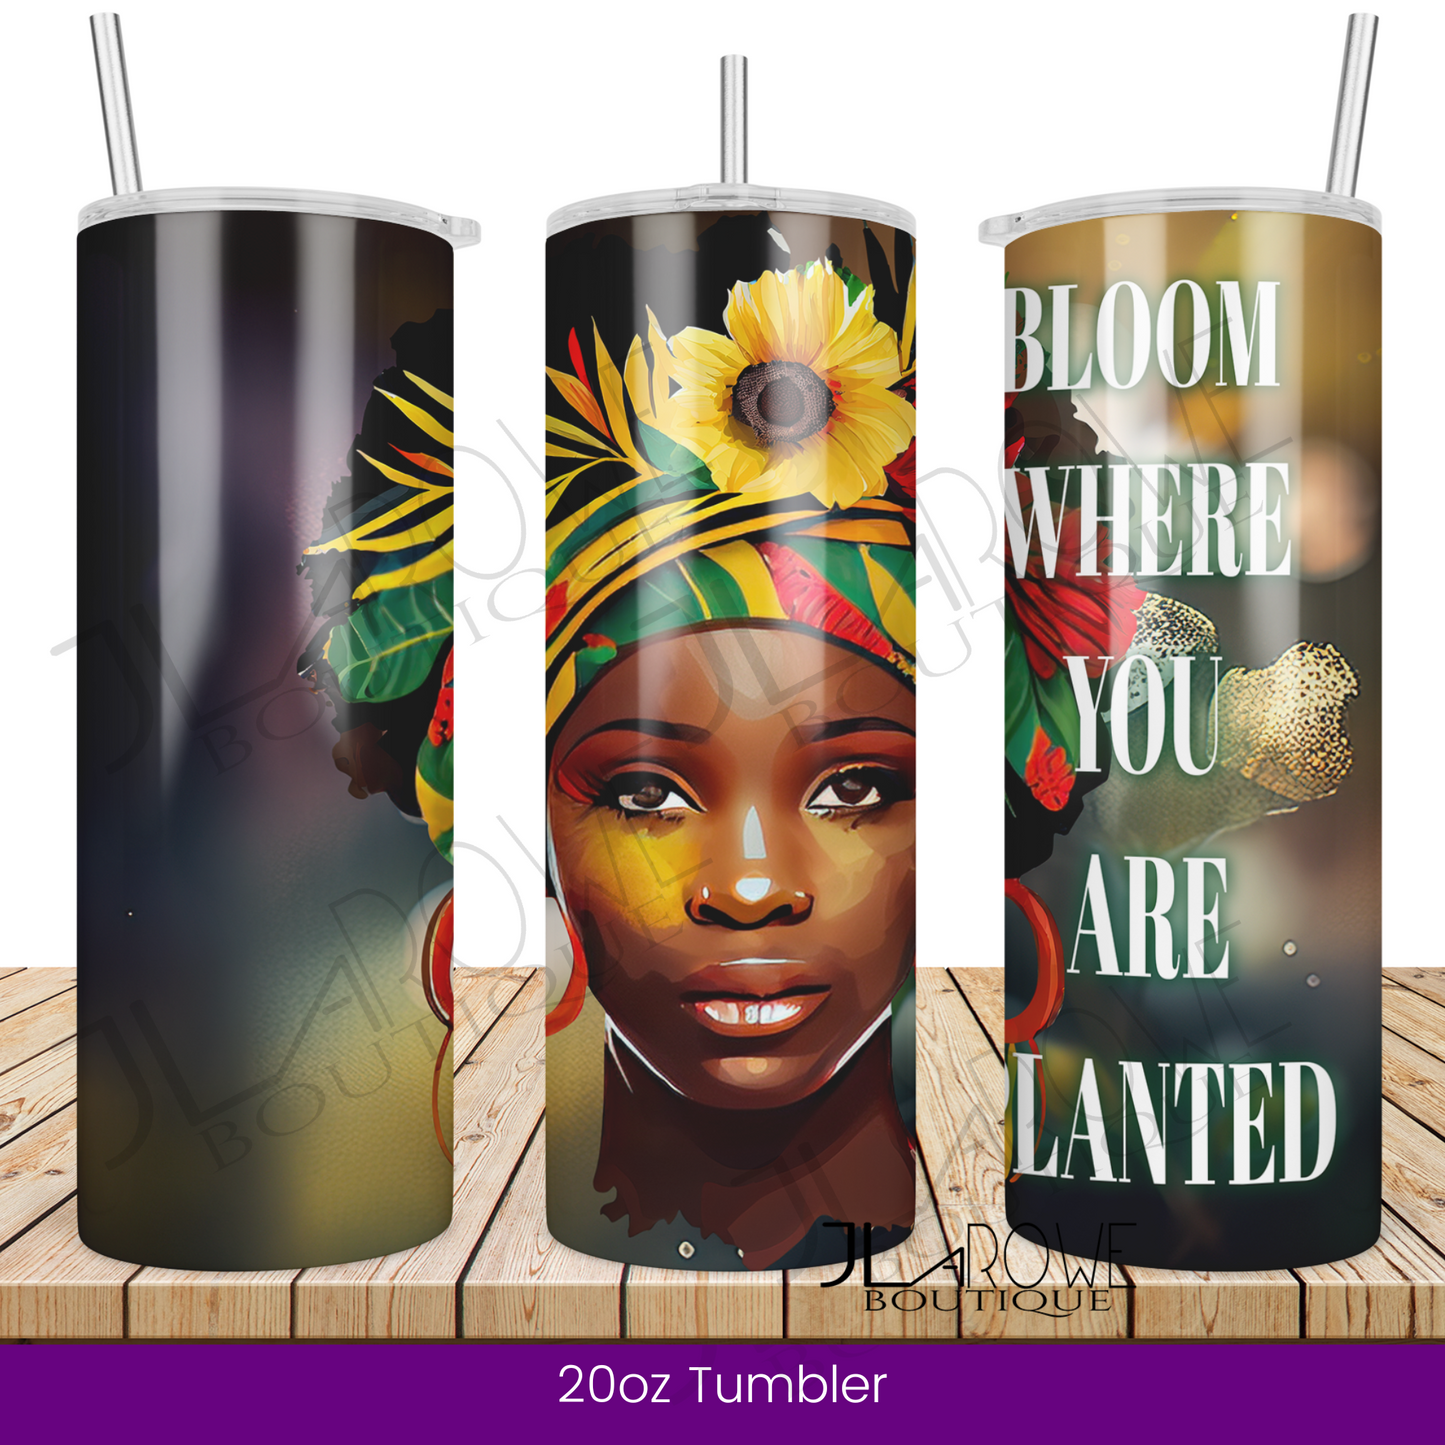 Bloom Where you are Planted - 20oz Tumbler